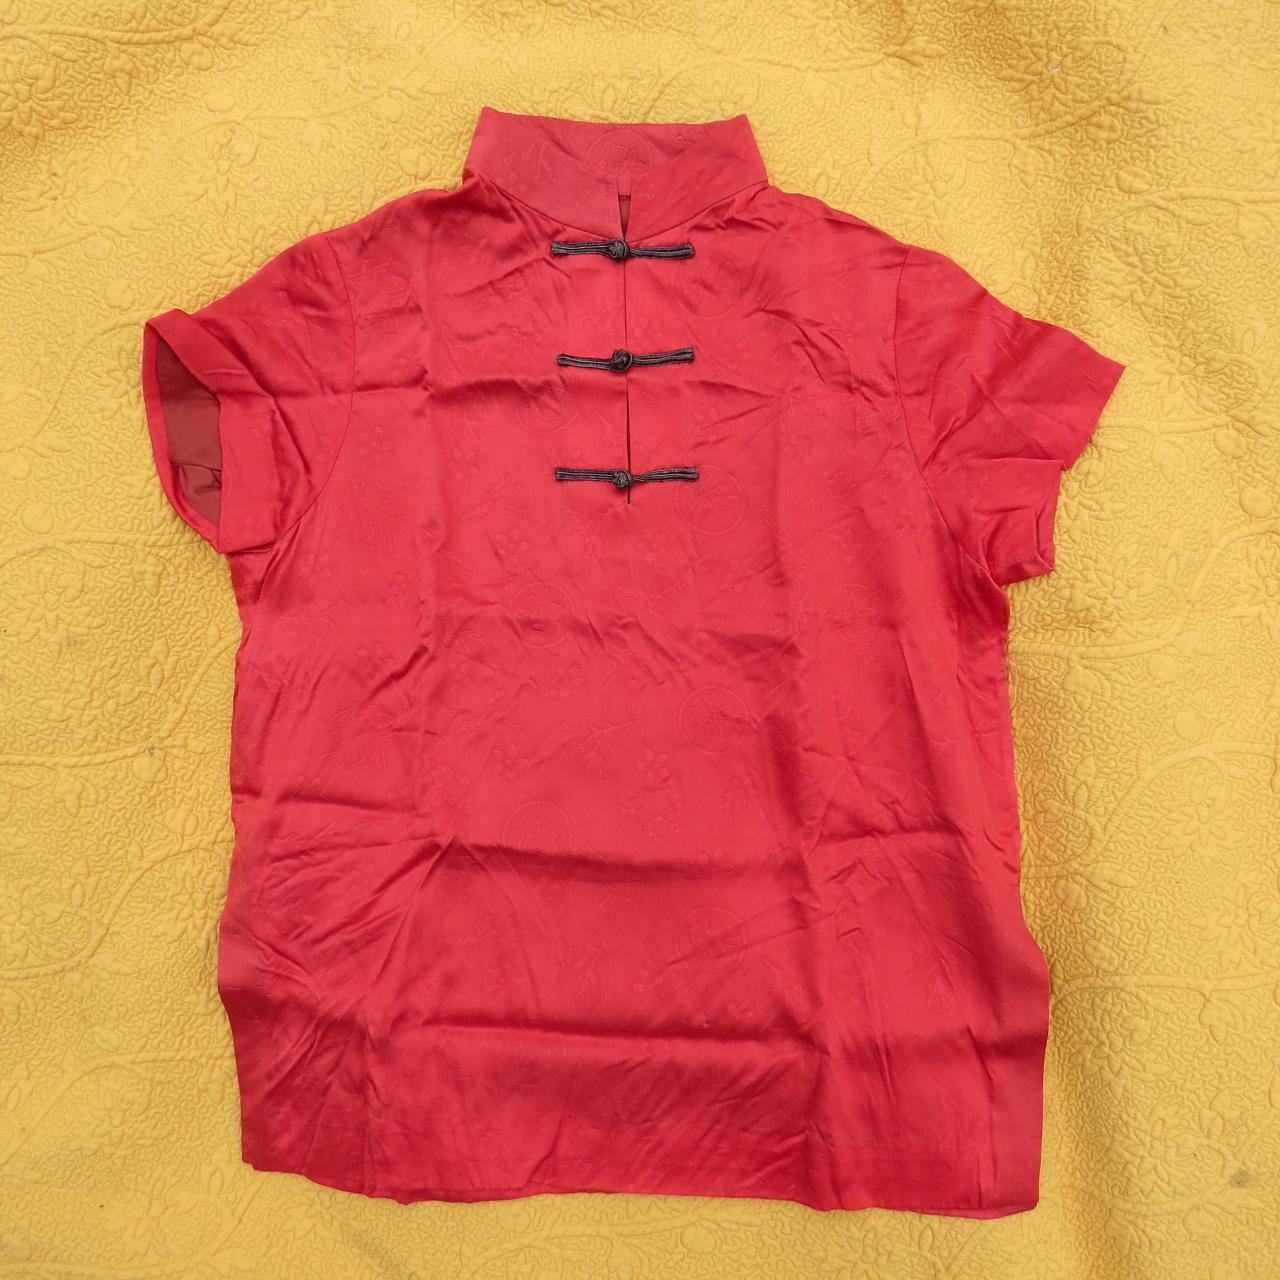 Product Image 1 - Five Colors Earth Beijing shirt

100%